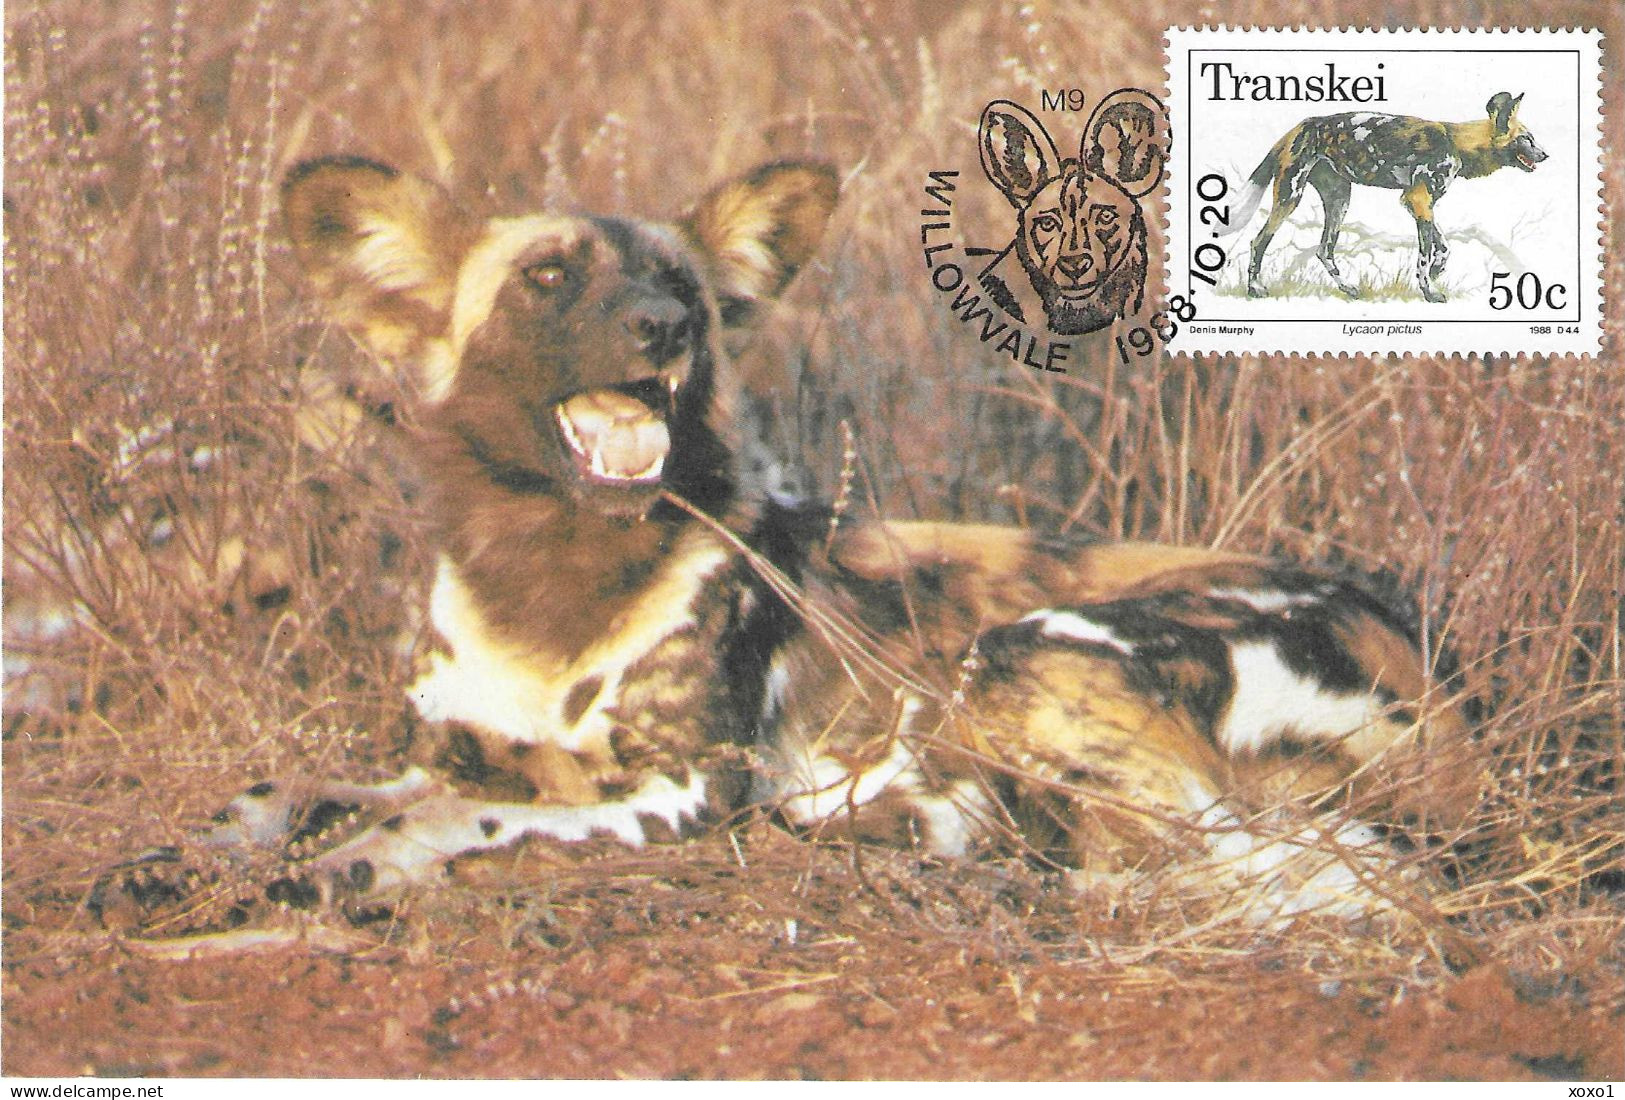 Transkei South Africa 1988 MiNr. 229  Animals  African Wild Dog (Lycaon Pictus) MC 1.80 € - Chiens